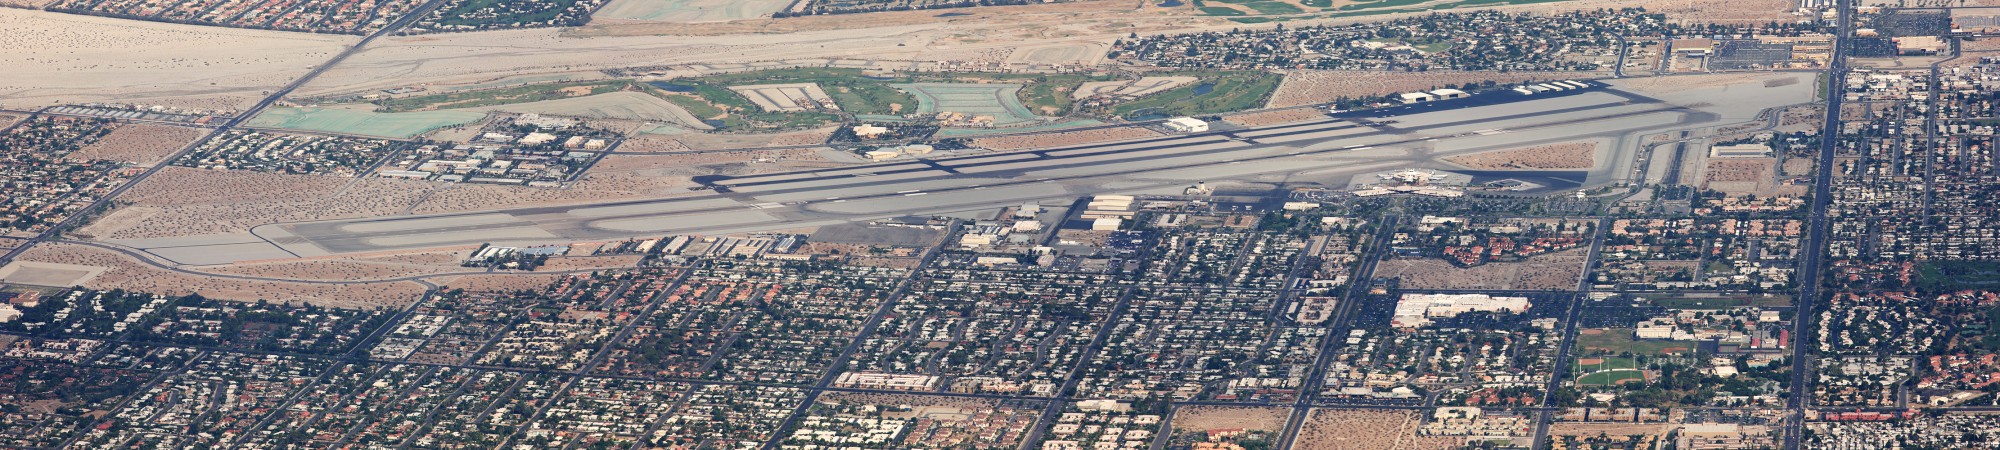 Palm springs airport aerial view